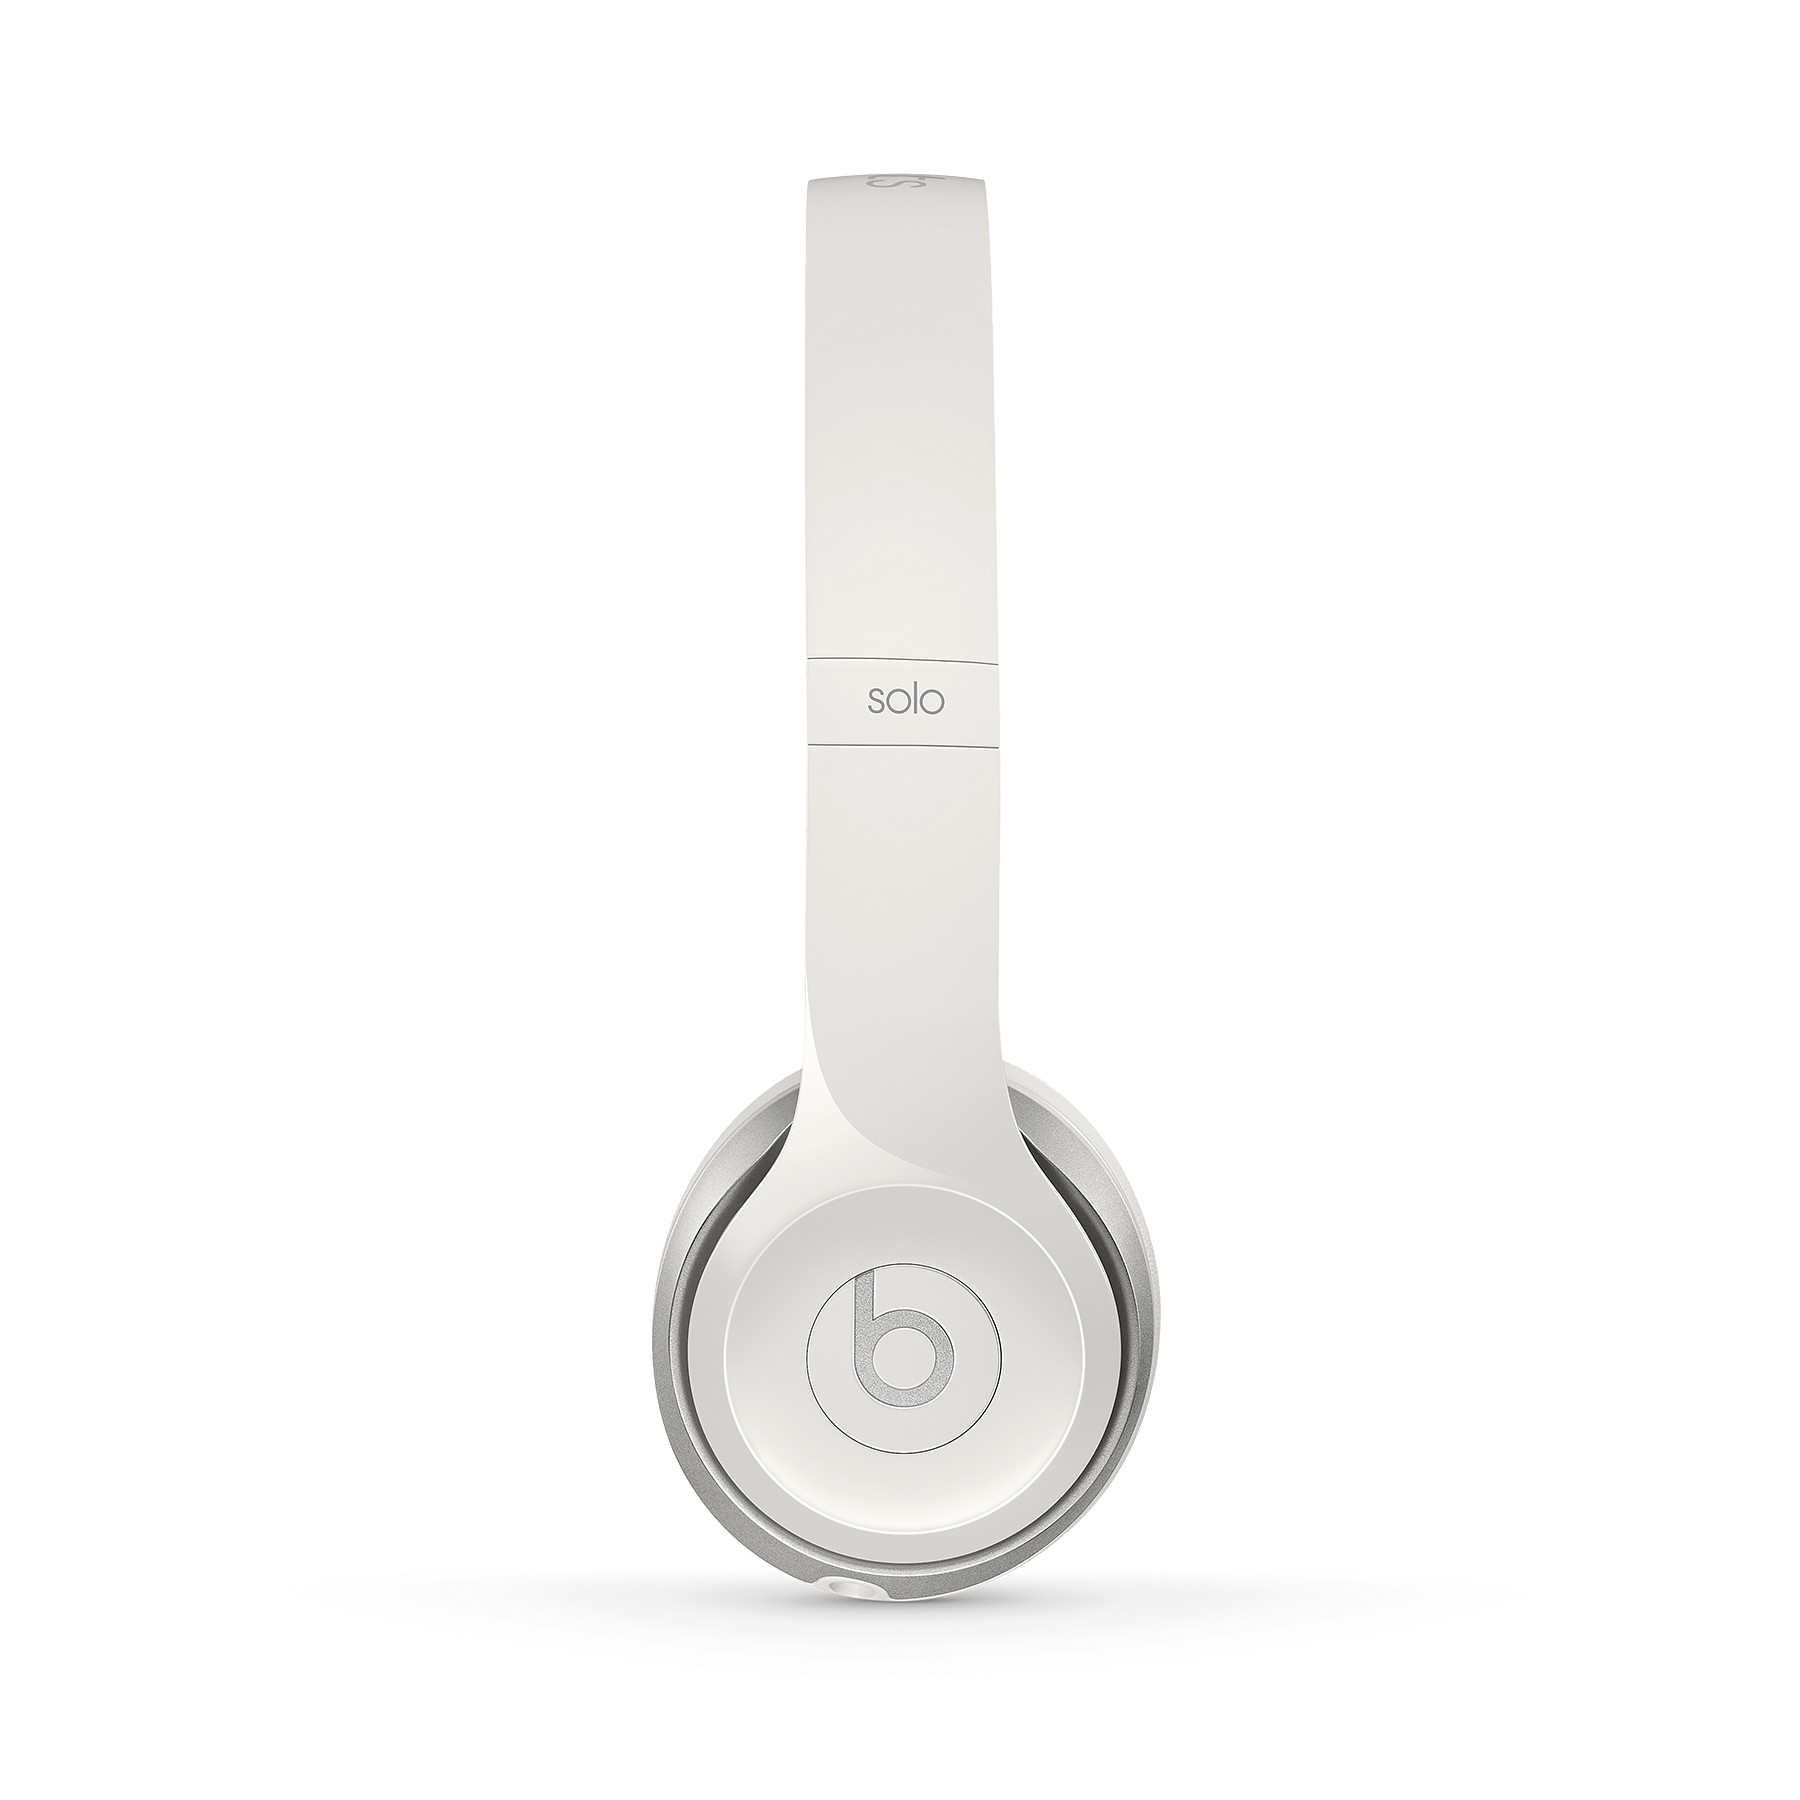 beats solo 2 white wired